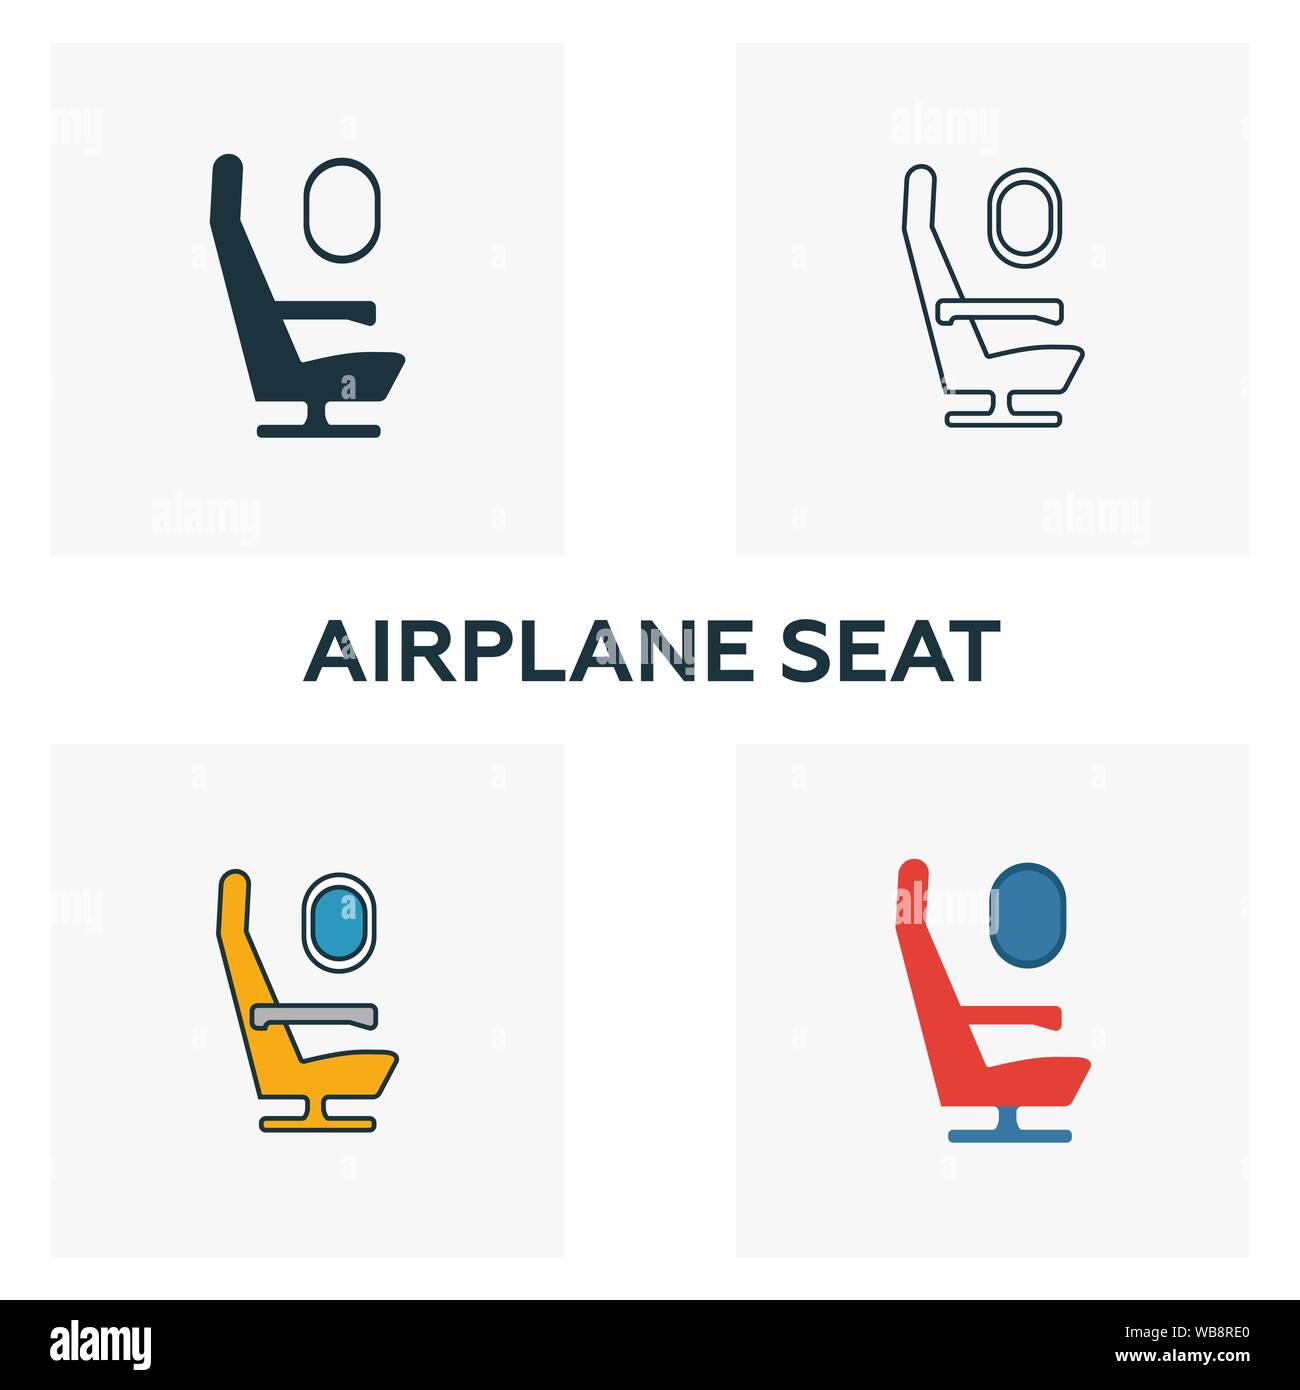 Airplane Seat icon set. Four elements in diferent styles from airport icons collection. Creative airplane seat icons filled, outline, colored and flat Stock Vector